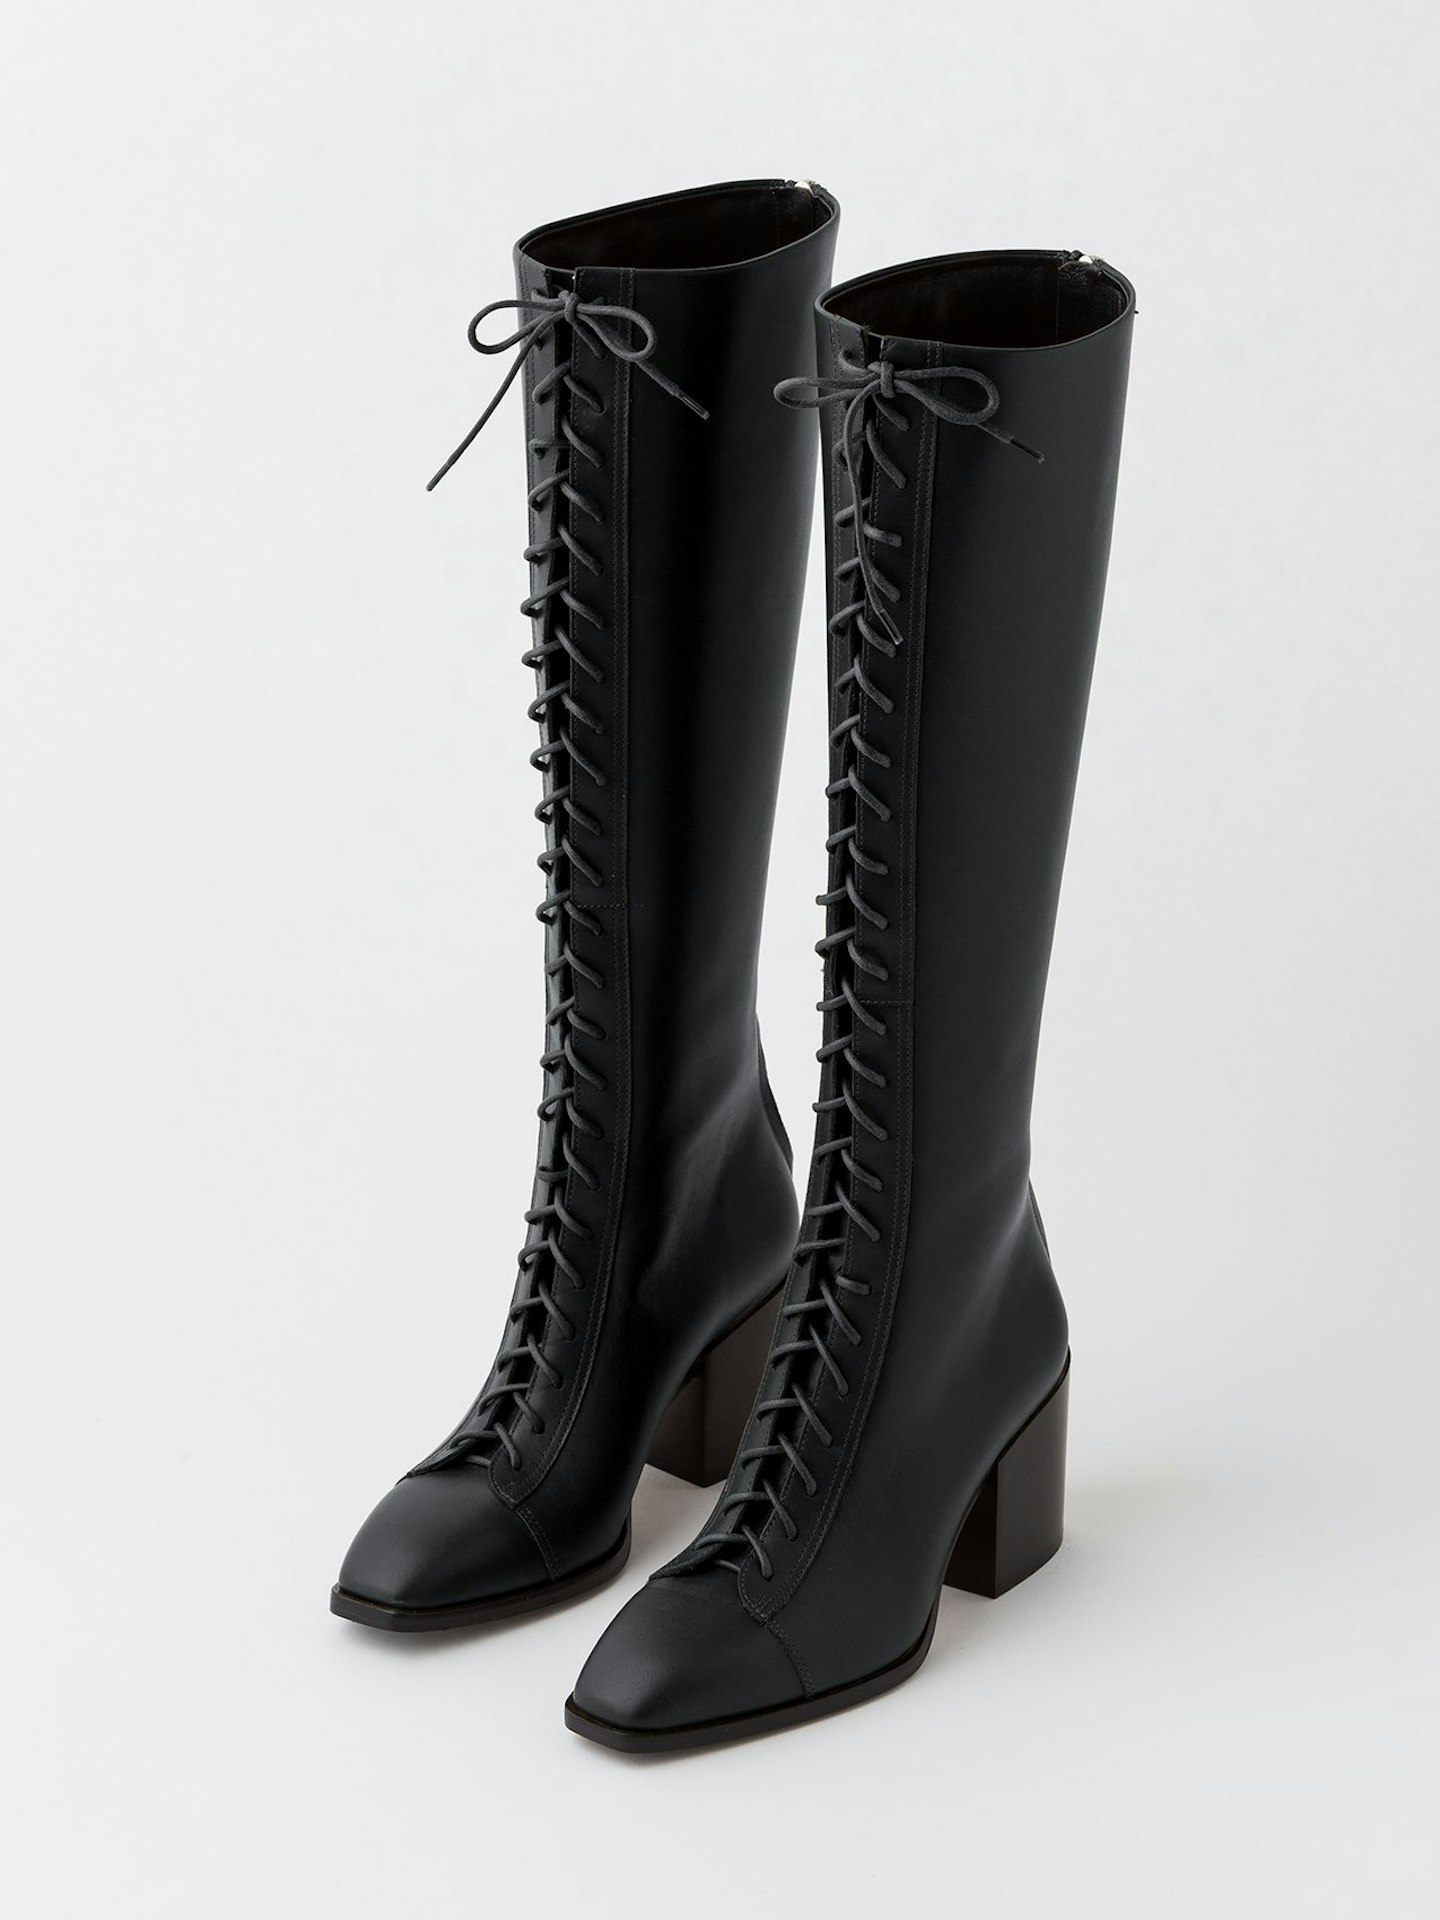 Aeyde, Britta Lace-Up Boots, £545